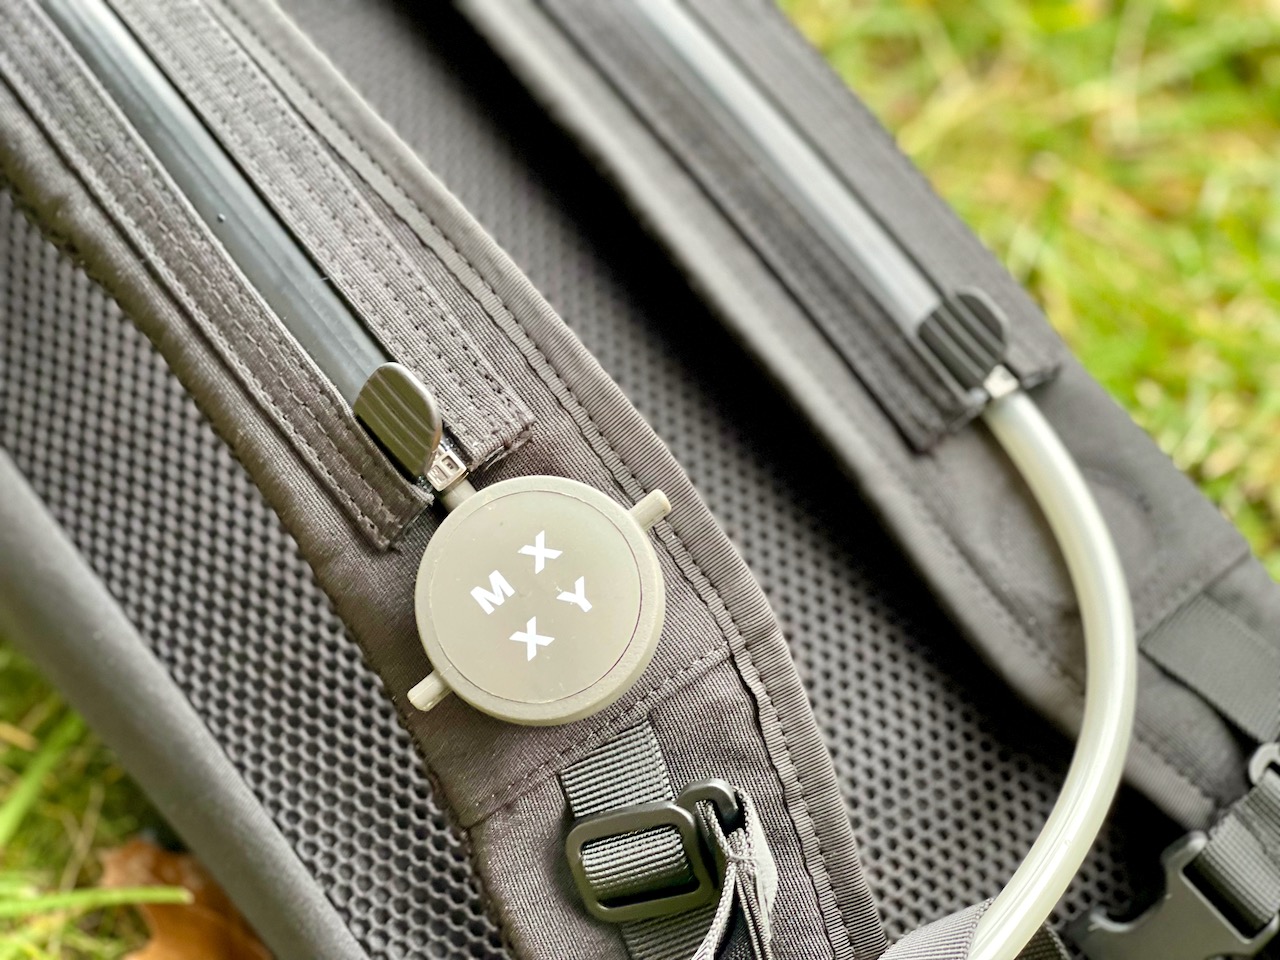 MXXY hydration pack mix dial